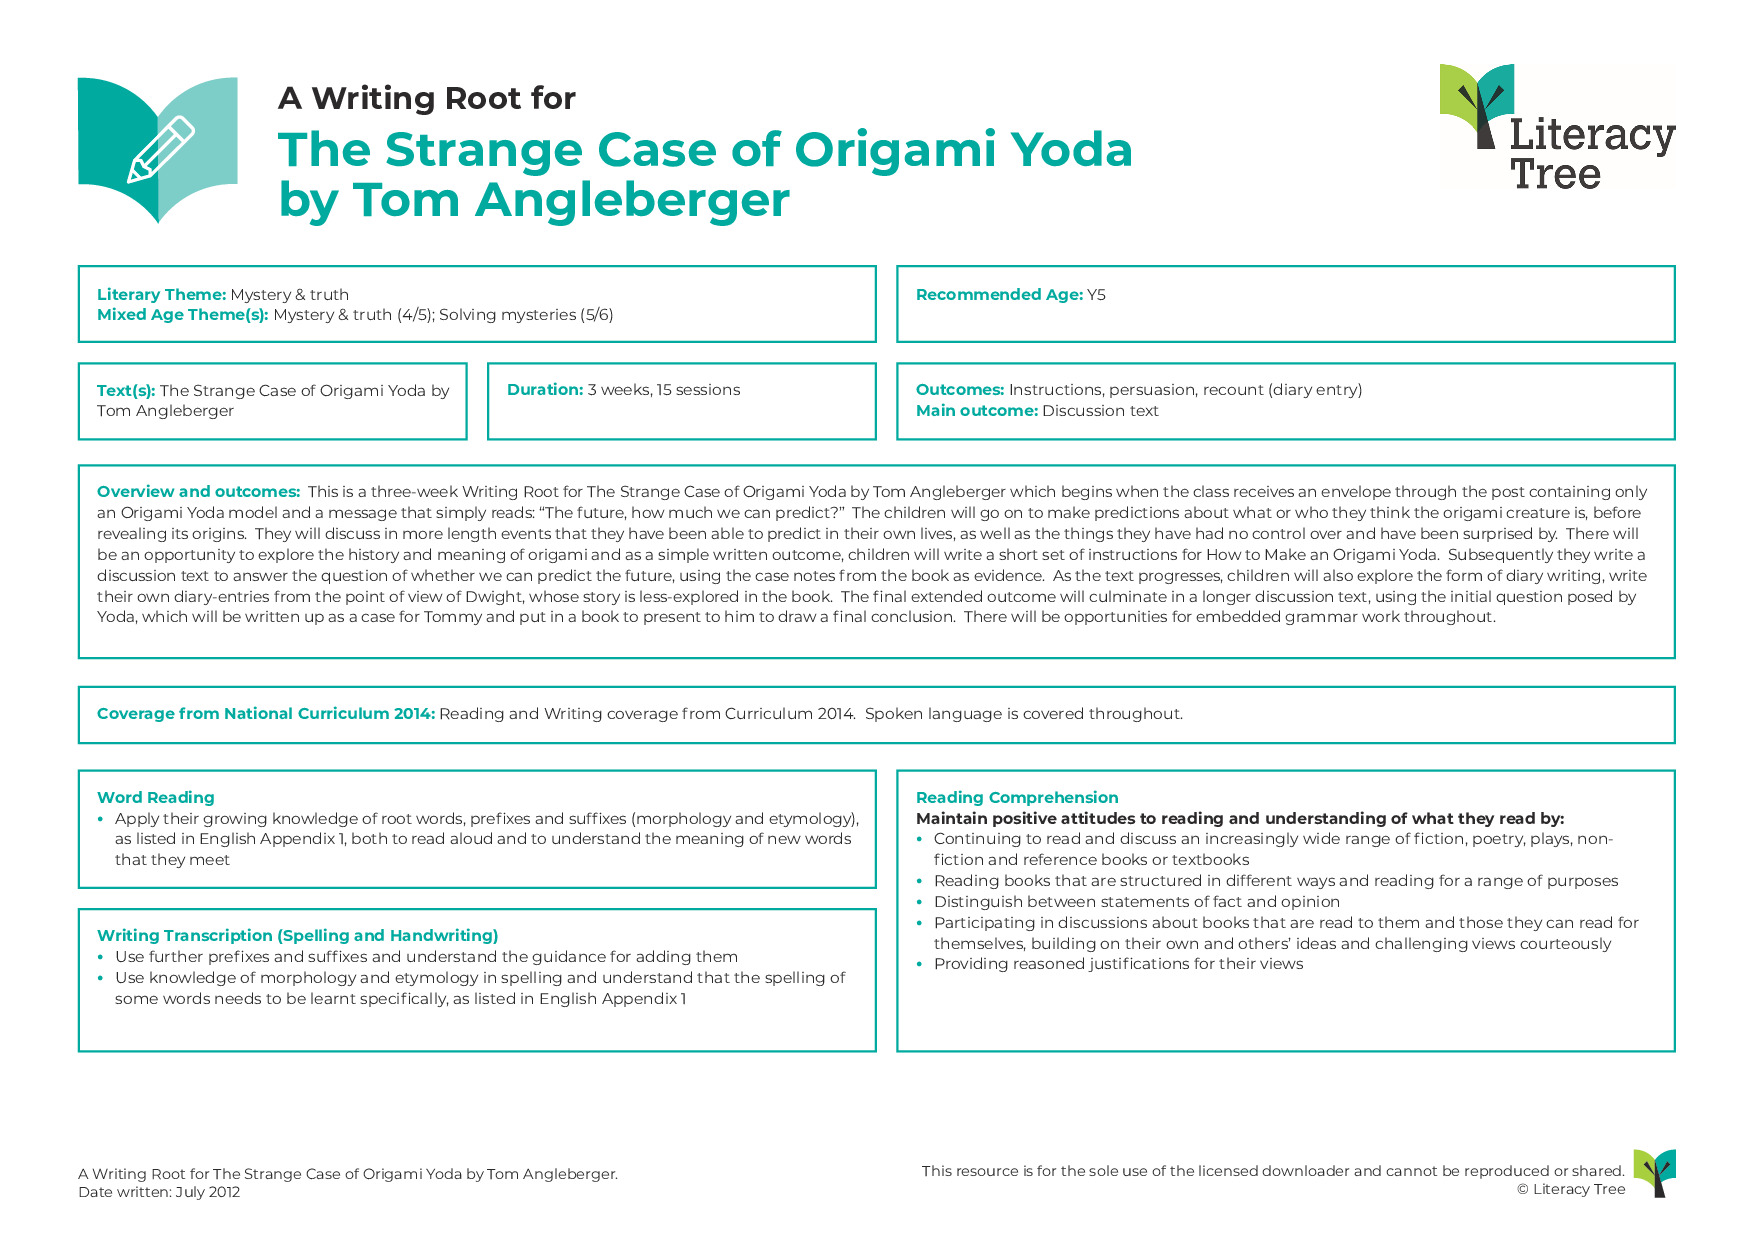 A Writing Root for The Strange Case of Origami Yoda